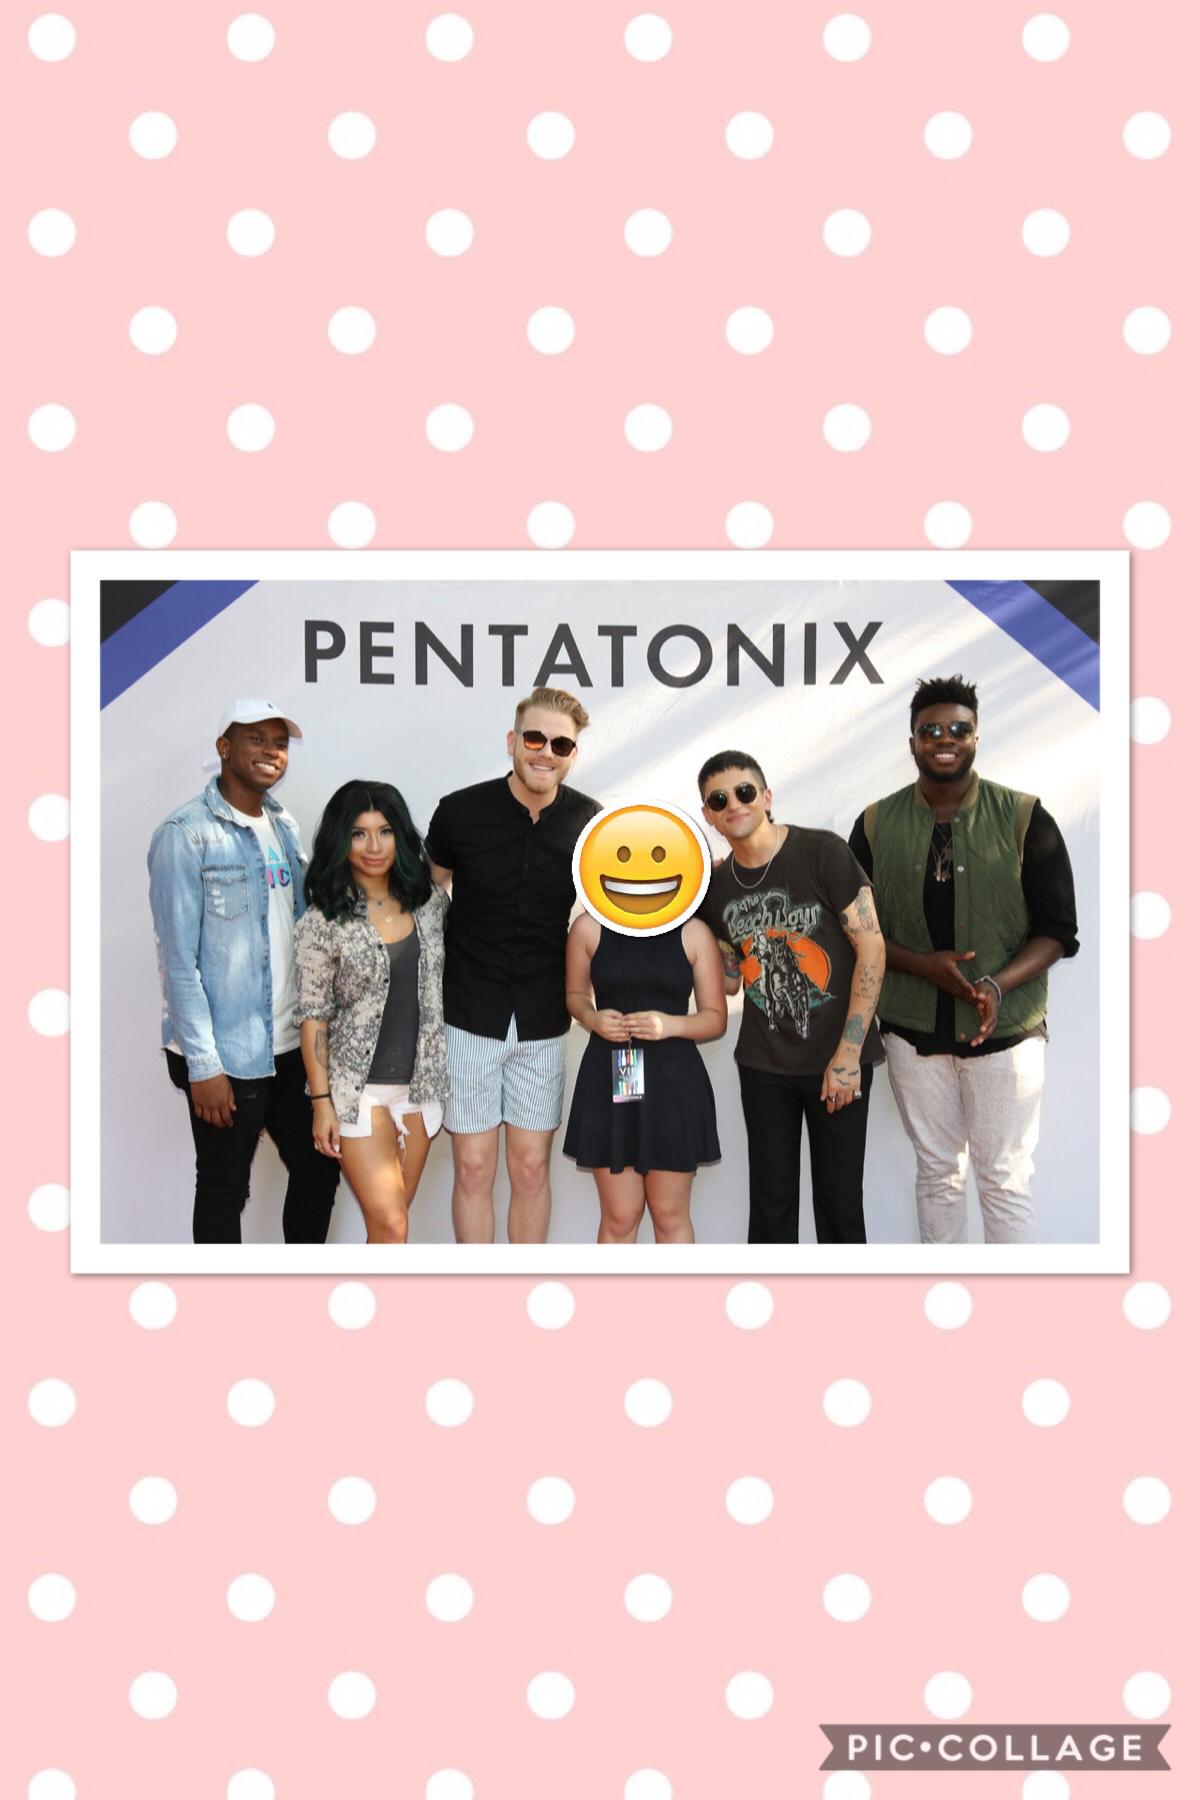 I FREAKING MET PENTATONIX!! 
IT WAS HE BEST EXPERIENCE OF MY LIFE!! THEY ARE SO KIND AND SWEET AND TALENTED!!!